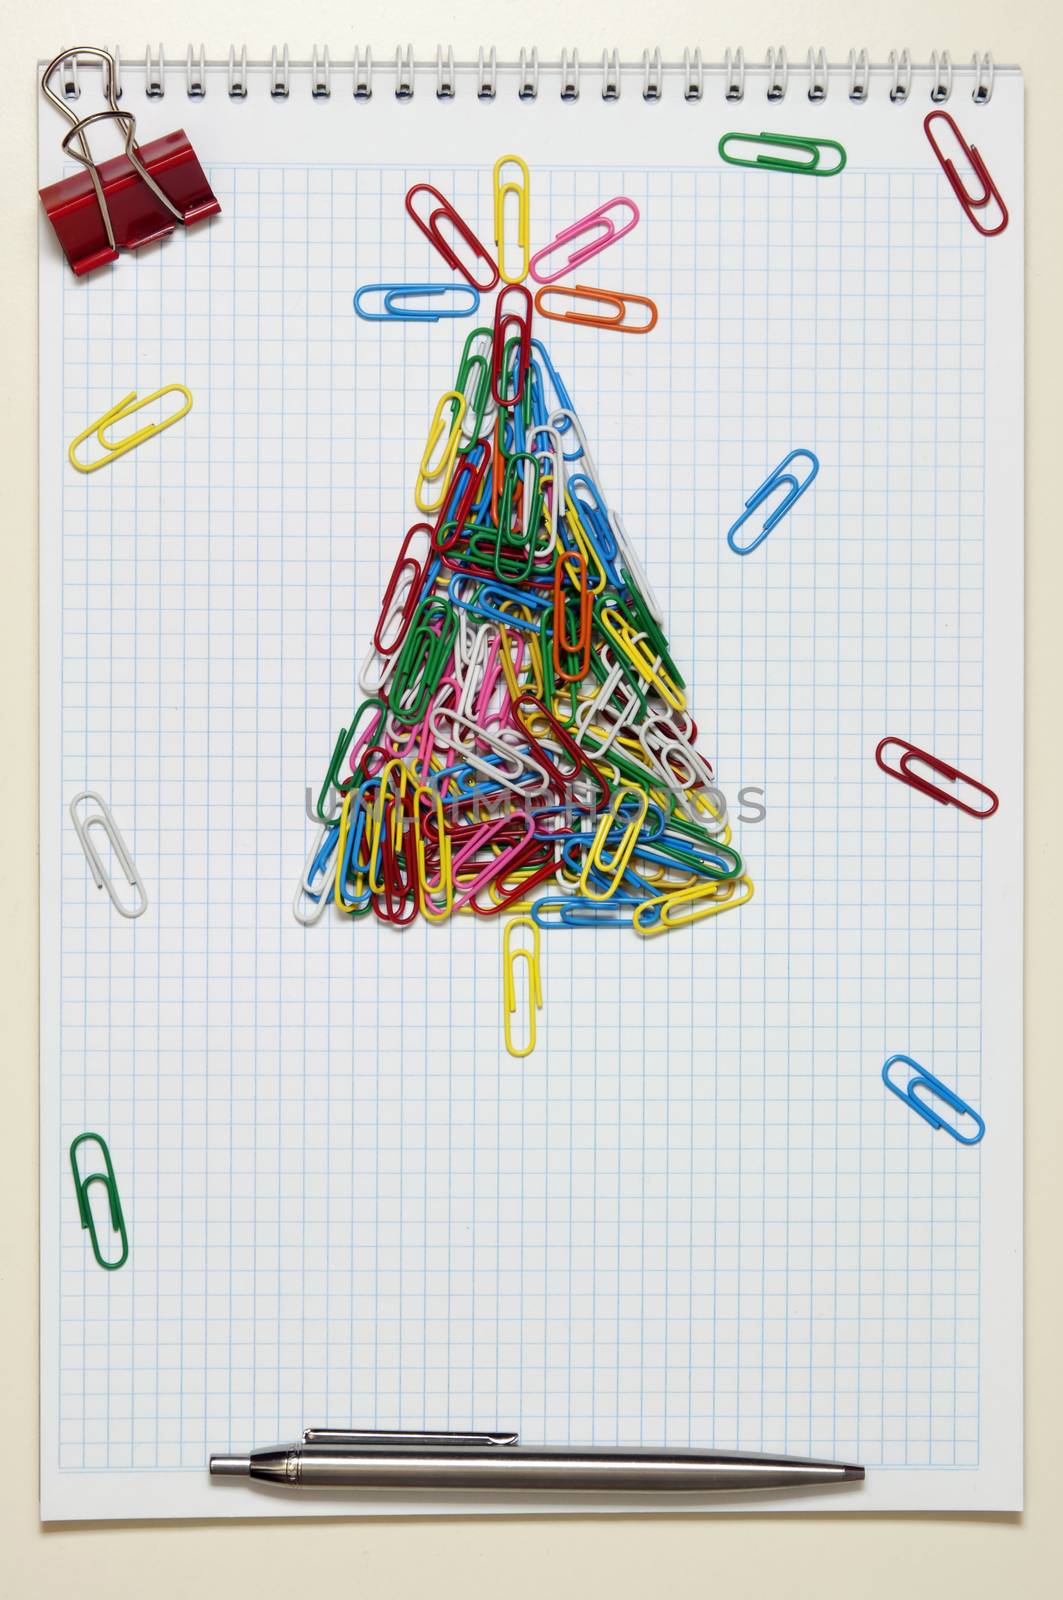 Christmas greeting card made of stationery by dred